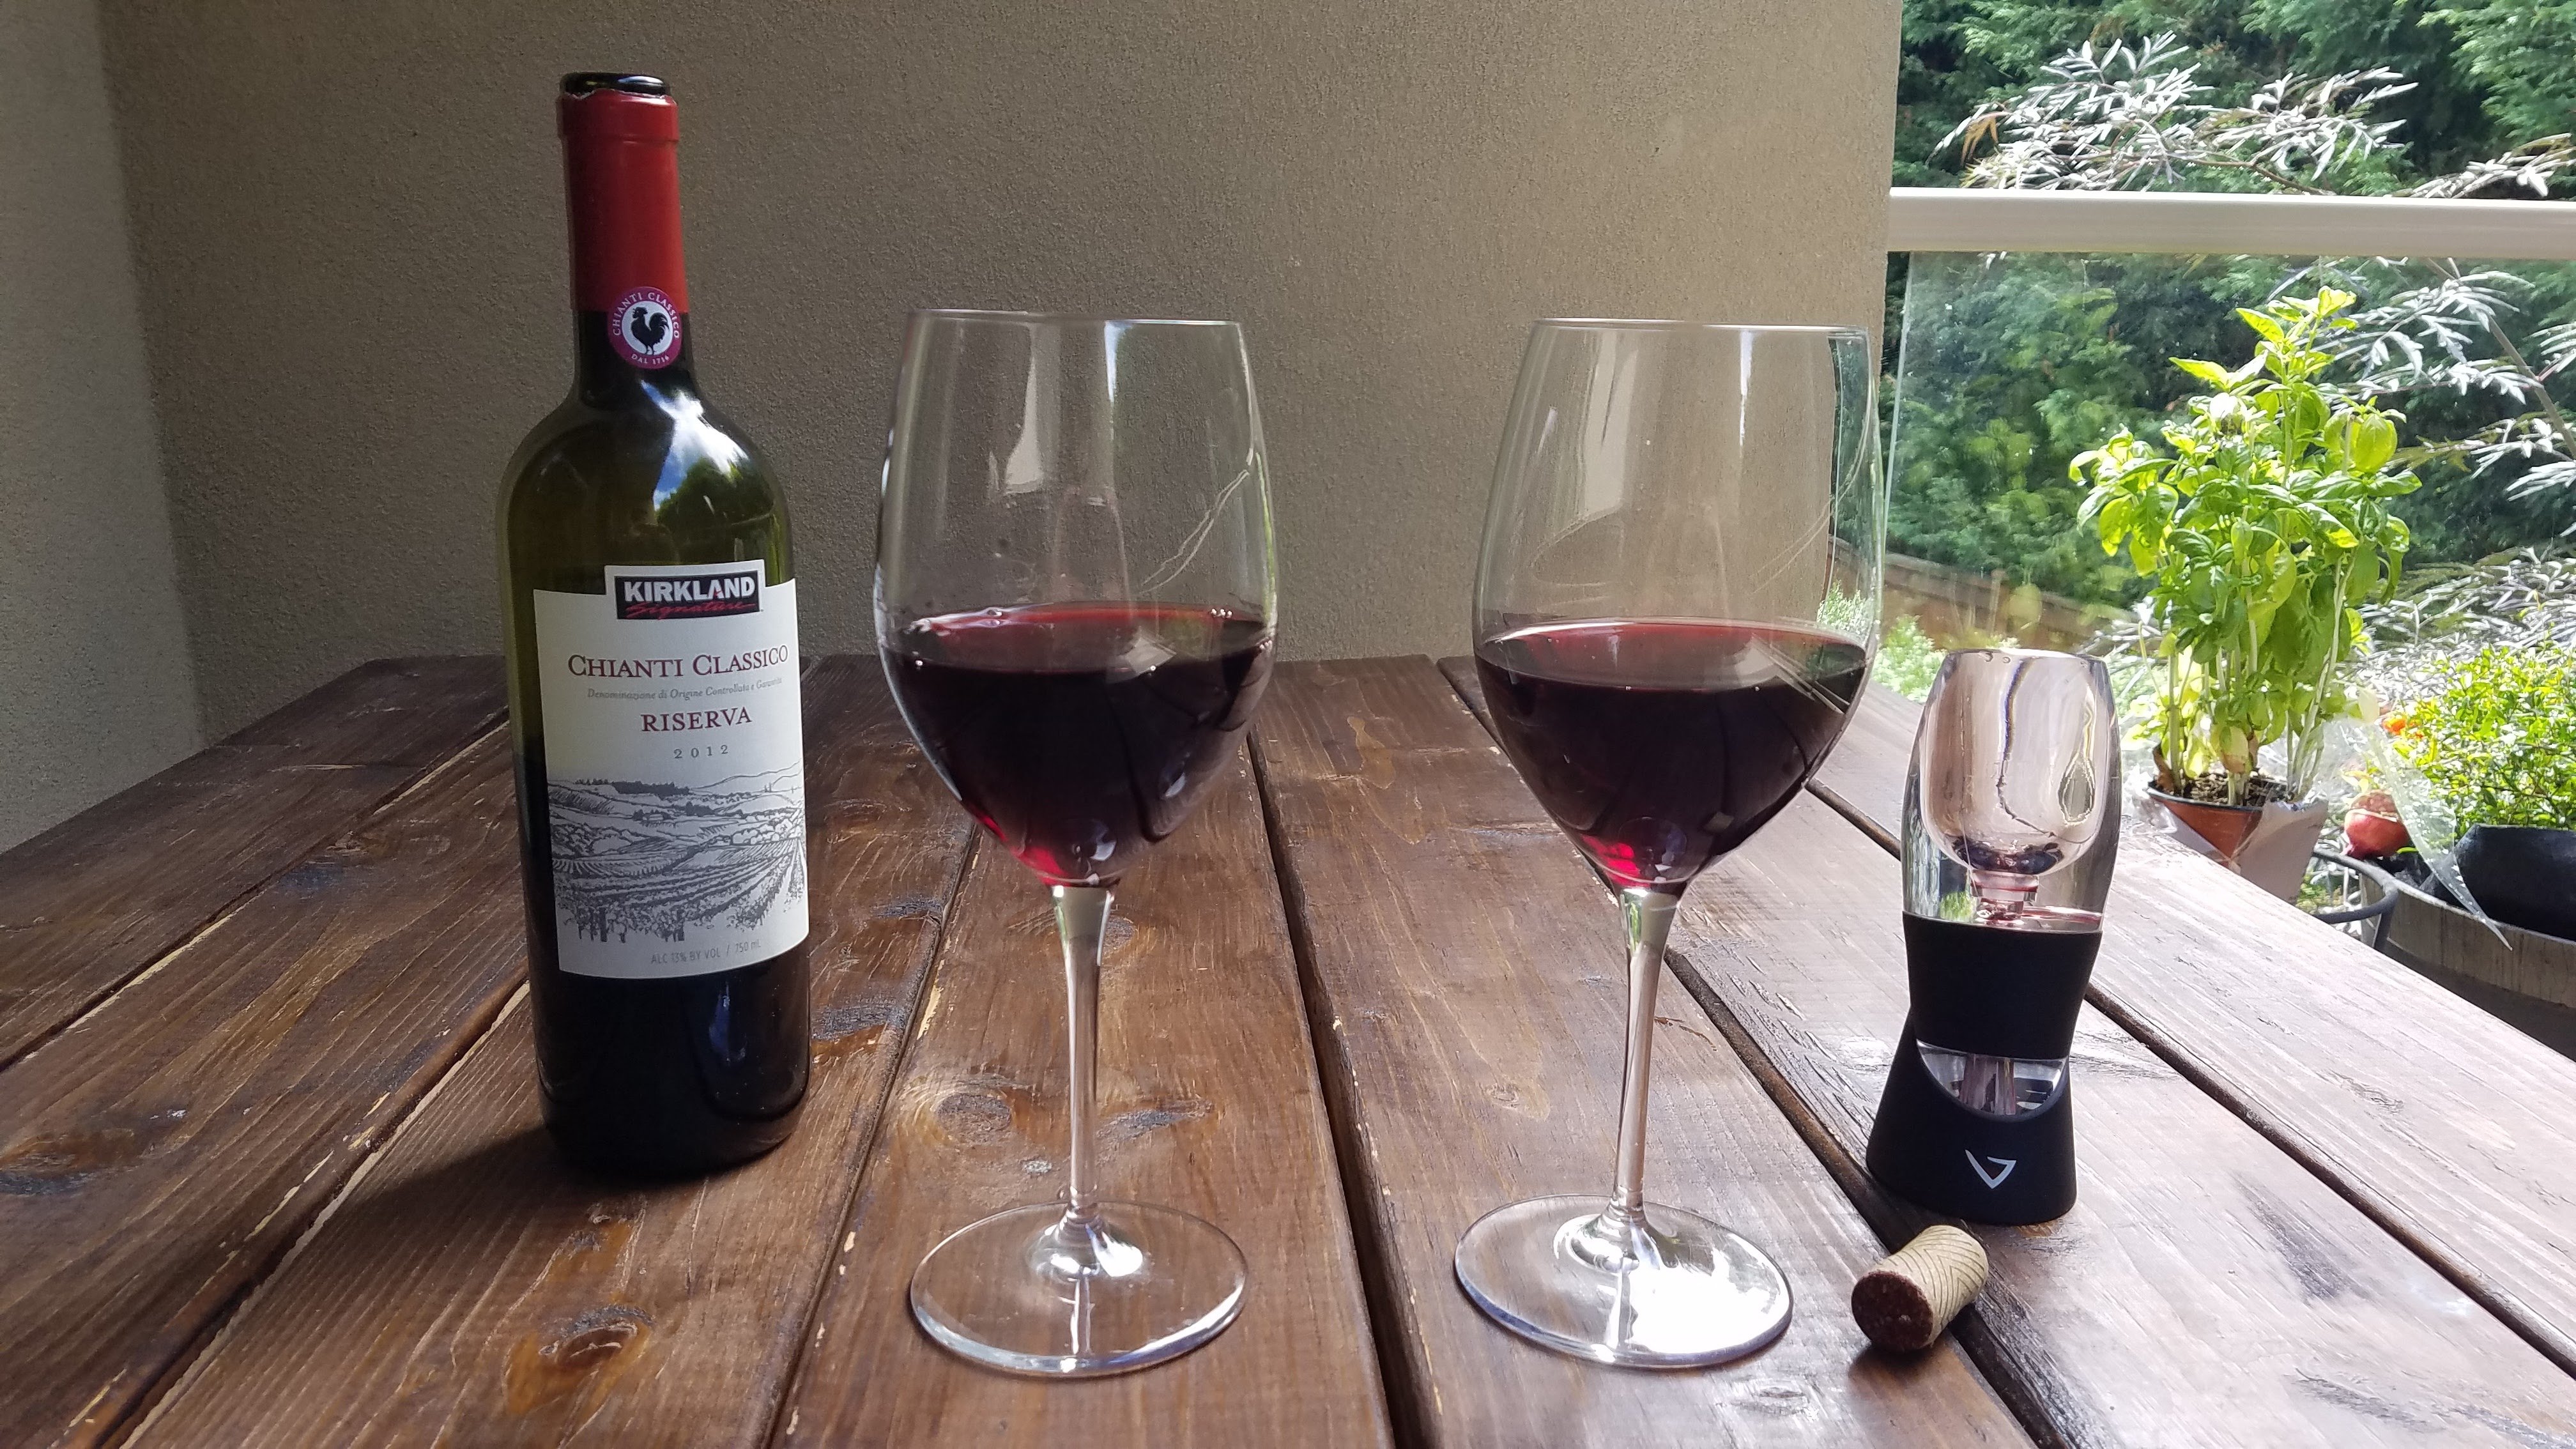 What to eat with Chianti wine and how to drink it